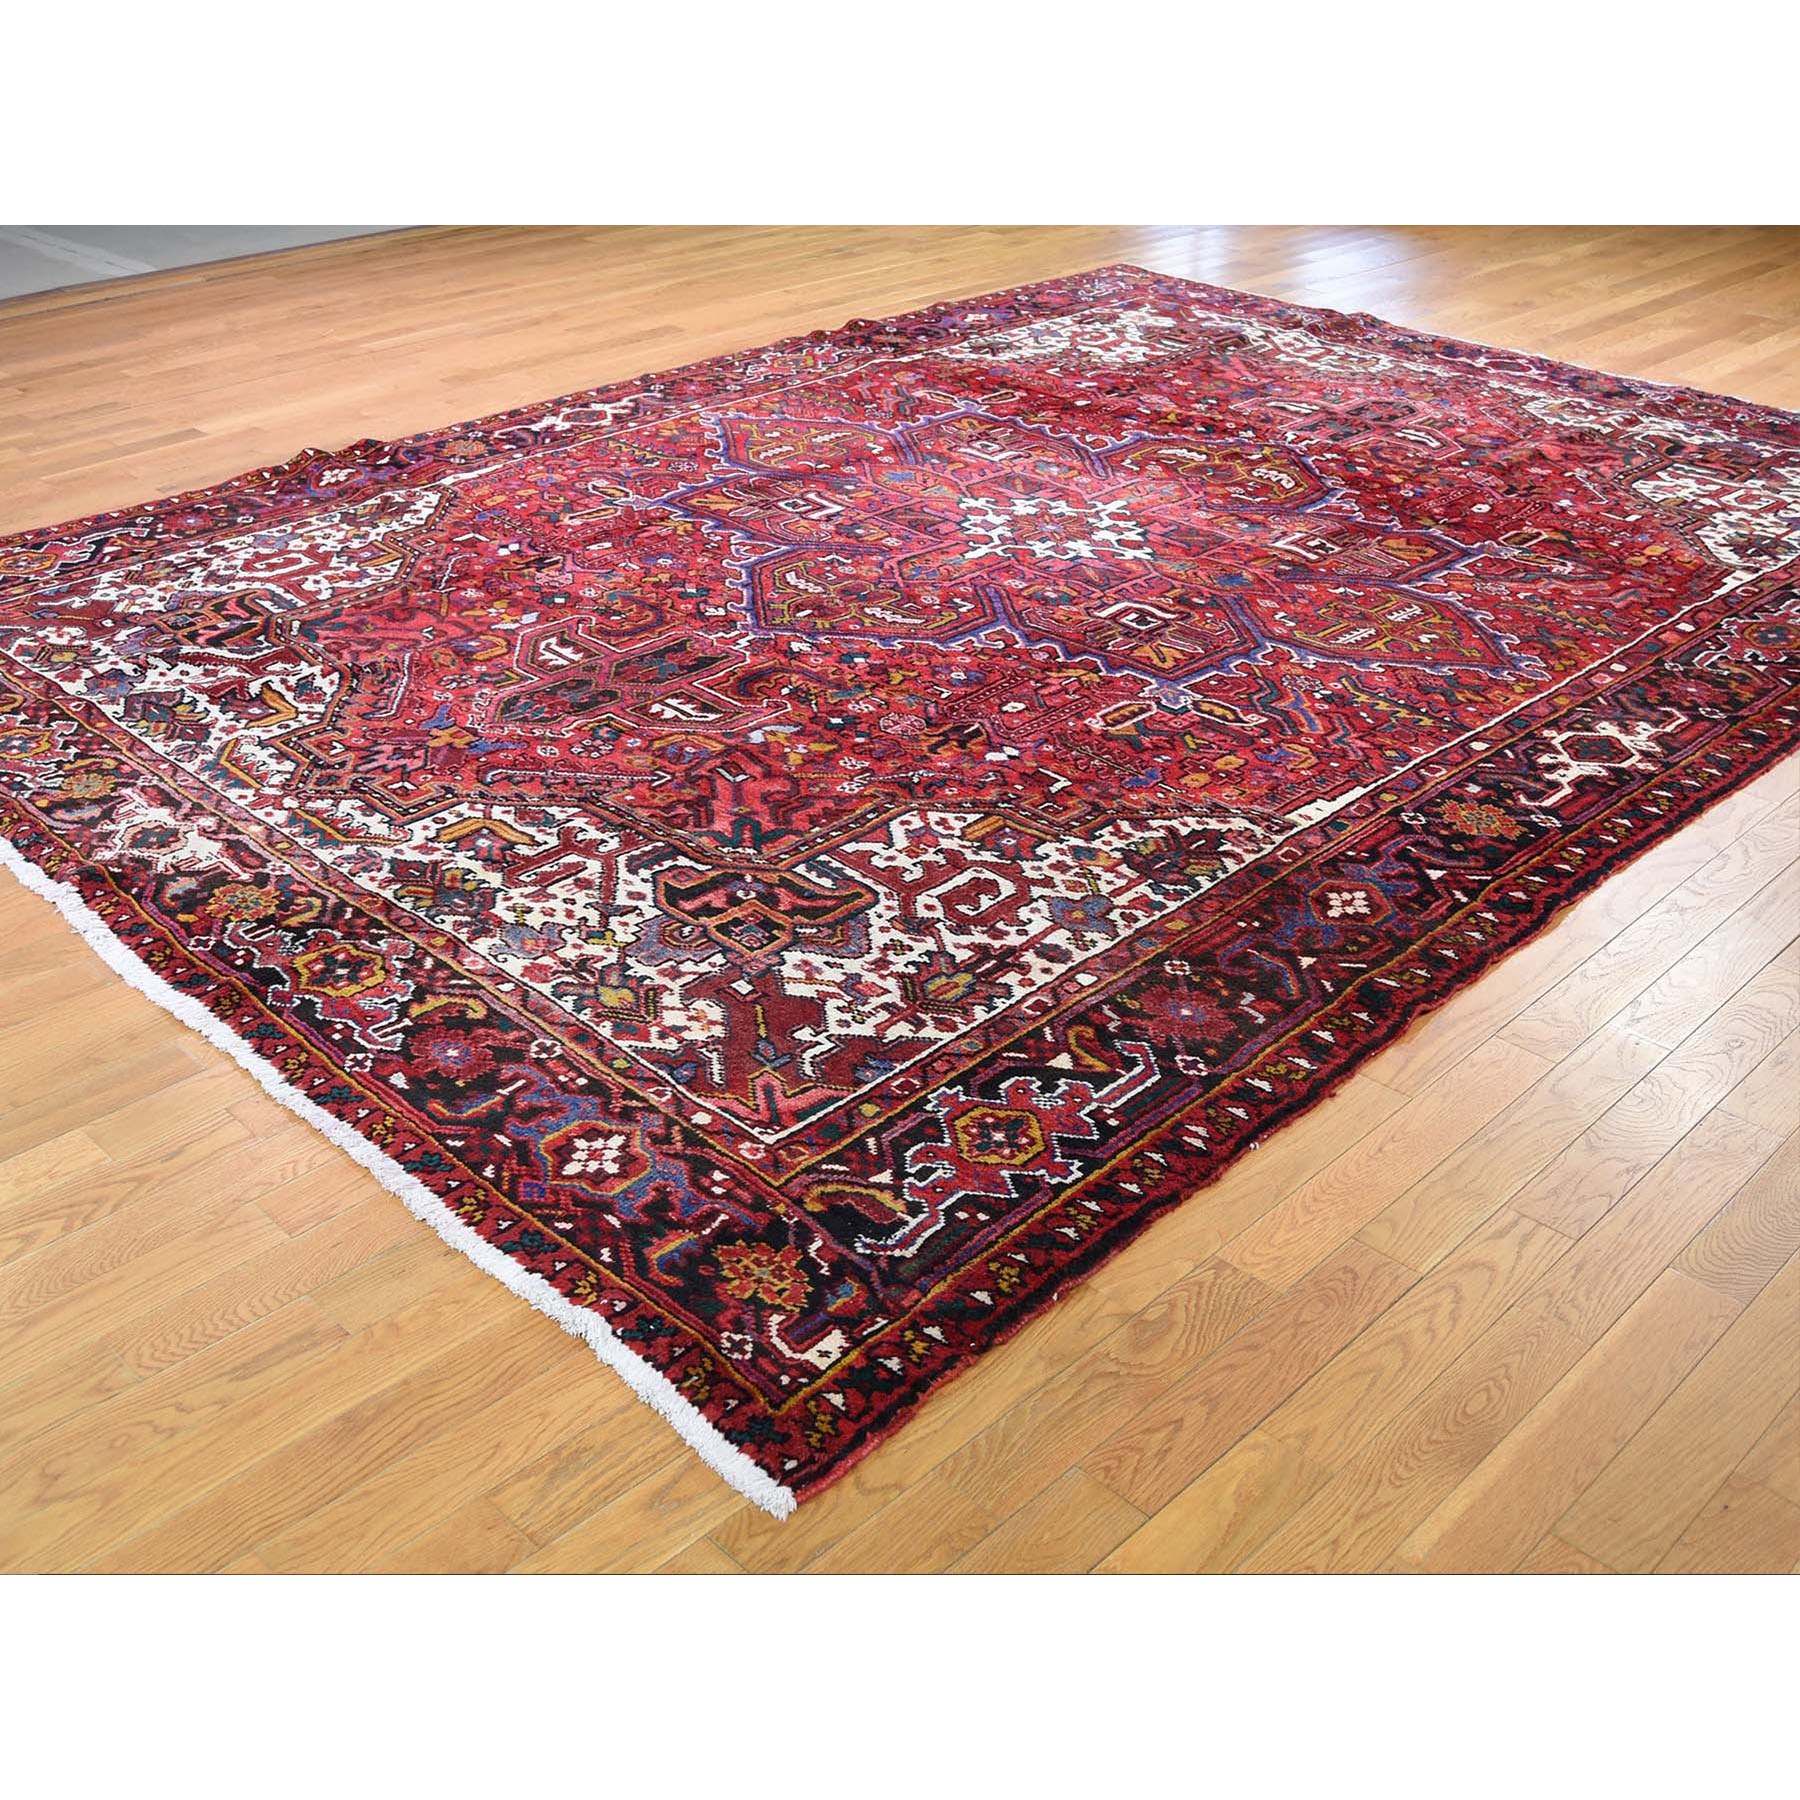 9-3 x12-4  Red Semi Antique Heriz Good Condition Pure Wool Hand-Knotted Oriental Rug 